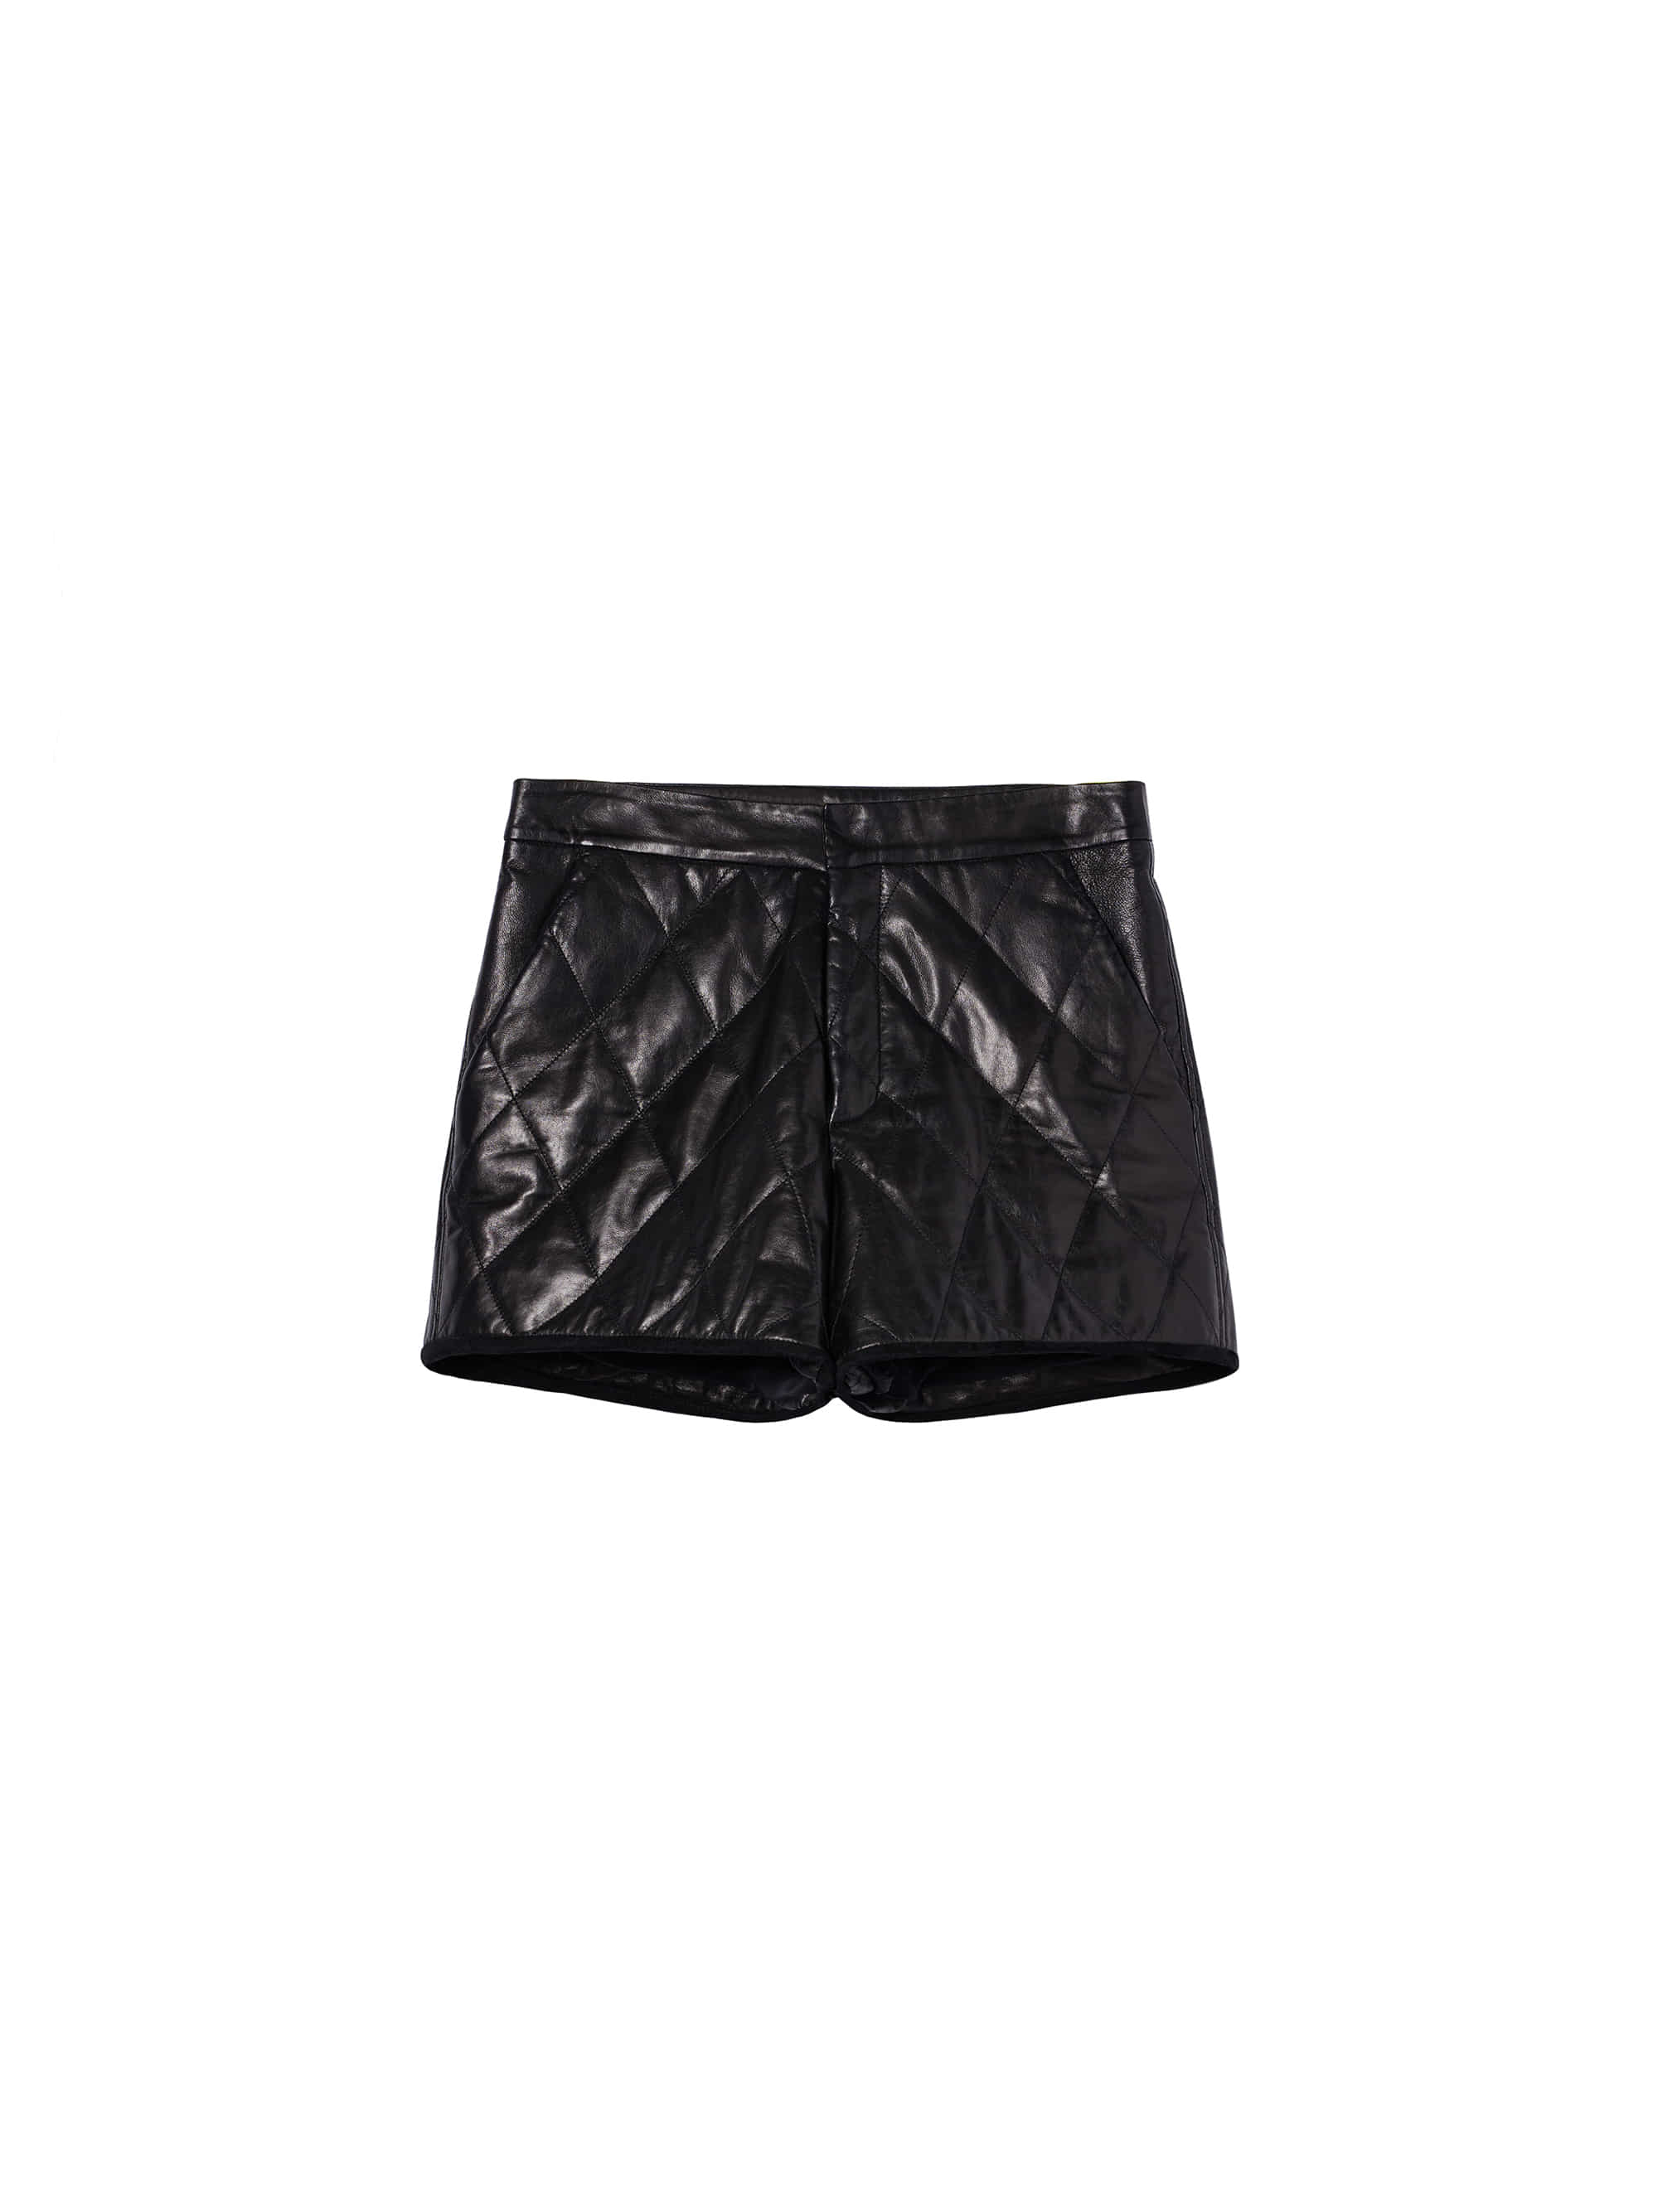 Lamb Leather Quilted Shorts / 램 레더 퀼트 쇼츠